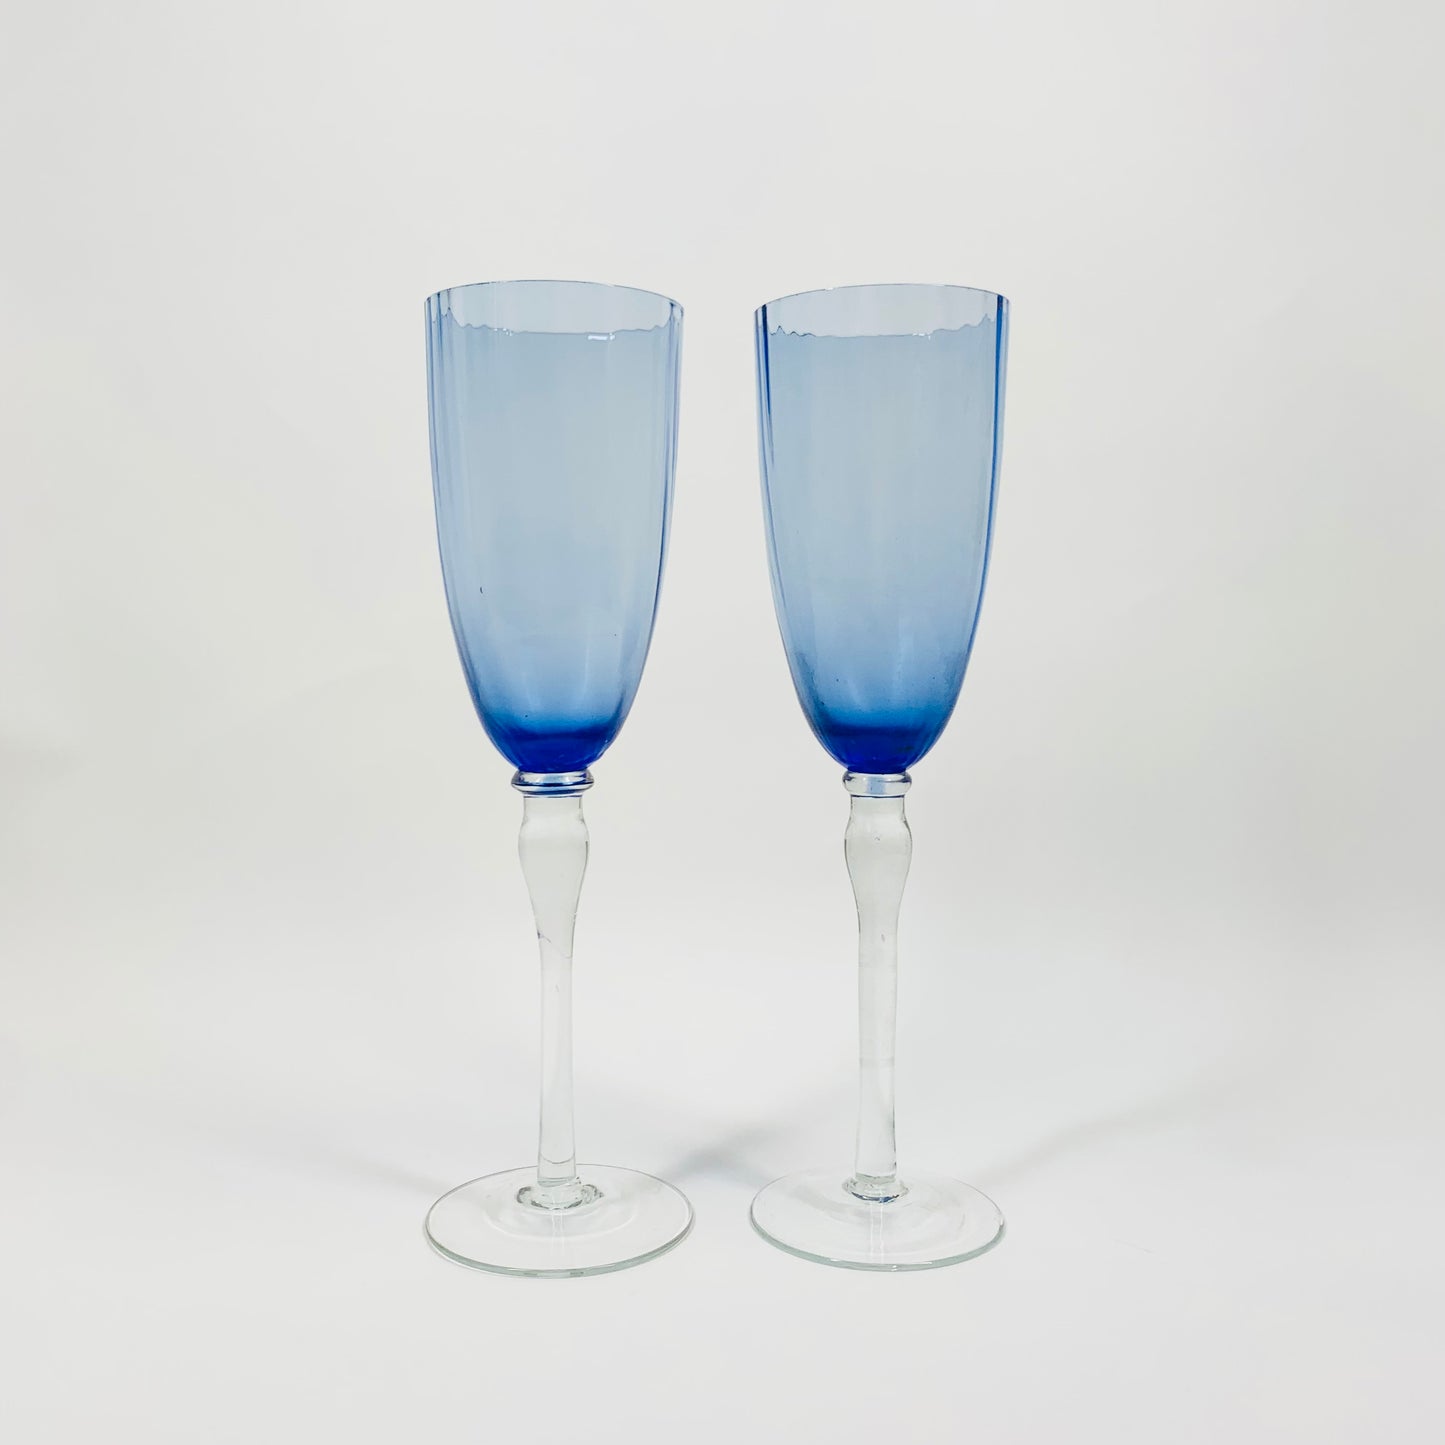 MCM blue glass champagne flutes with clear stems